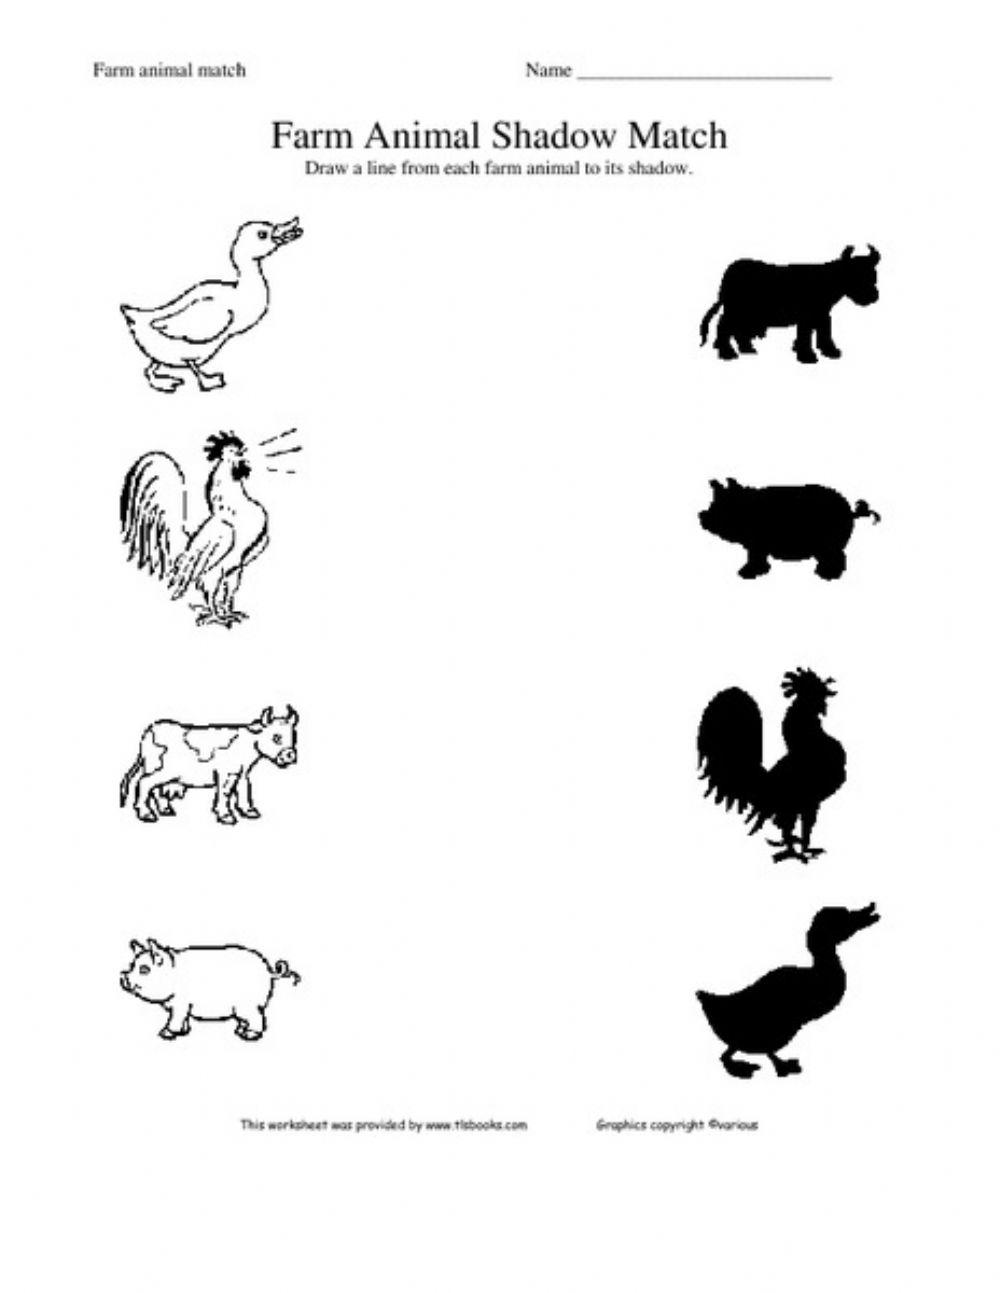 Match the animal with its shadow